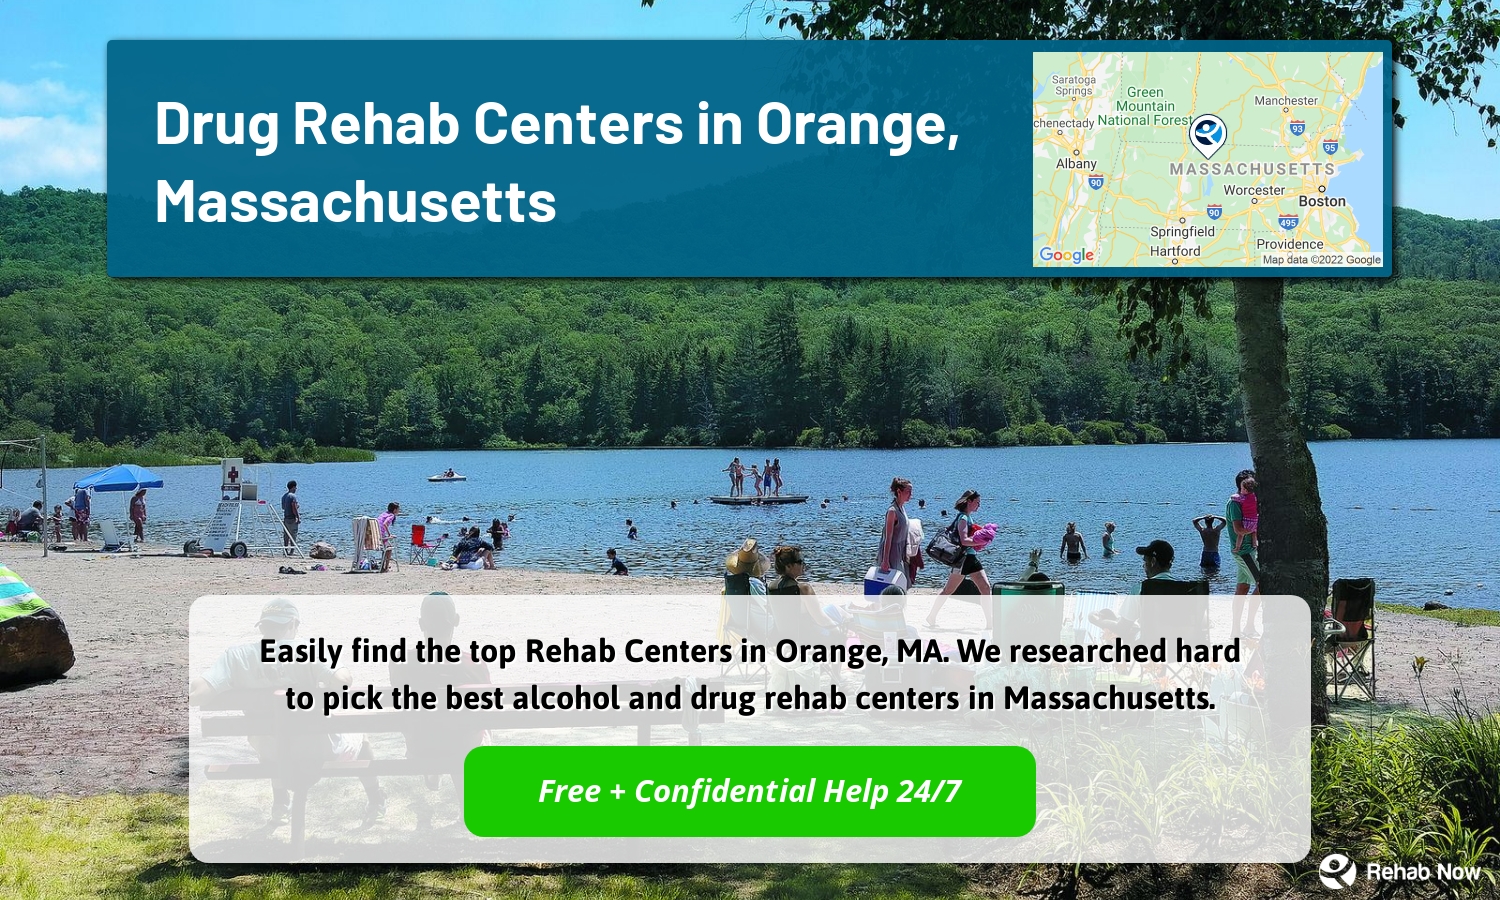 Easily find the top Rehab Centers in Orange, MA. We researched hard to pick the best alcohol and drug rehab centers in Massachusetts.